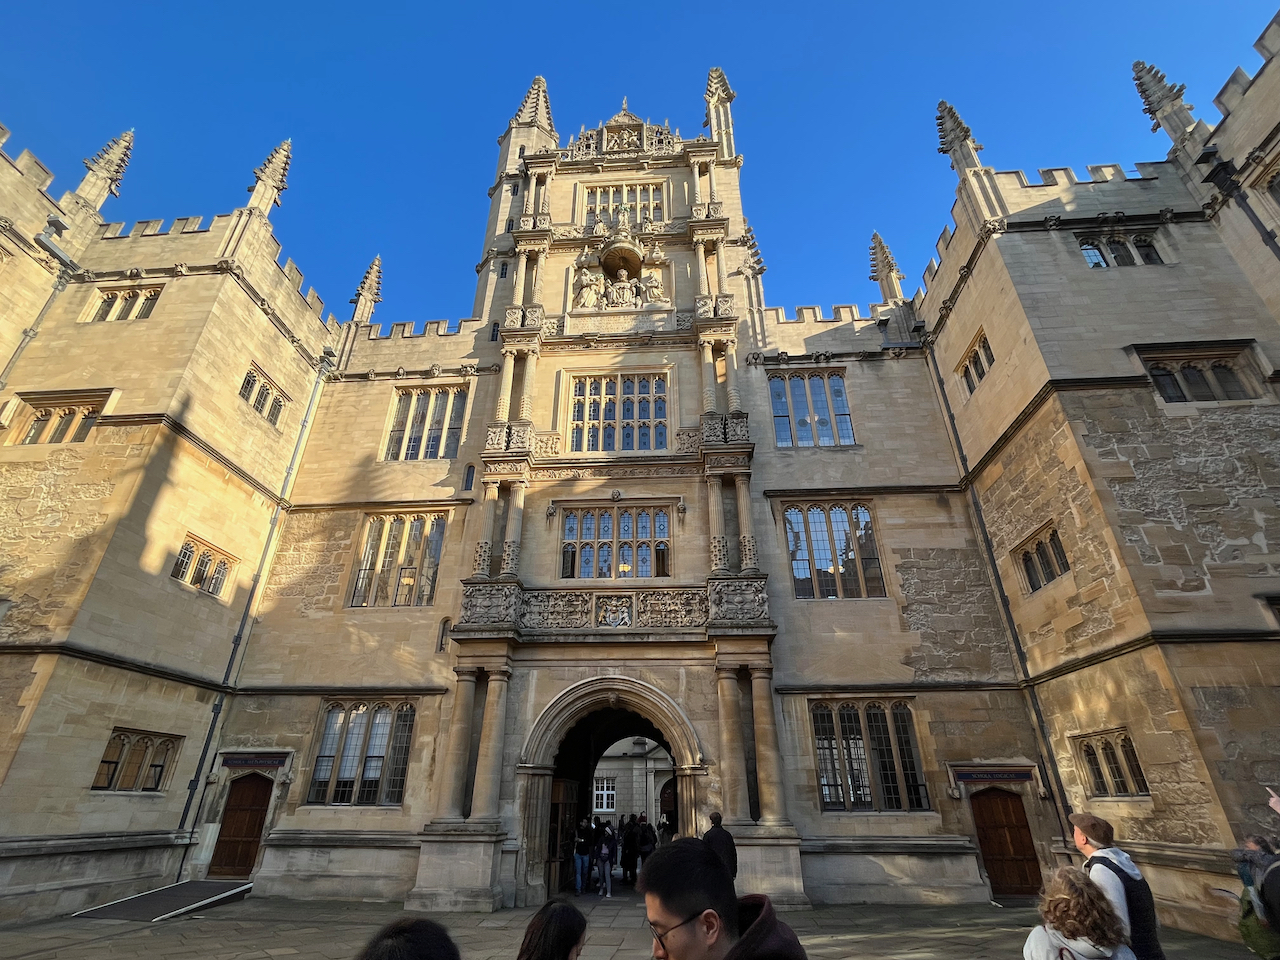 An ornately decorated 4 storey tower over the archway entrance to the Bodleian Library quadrangle.